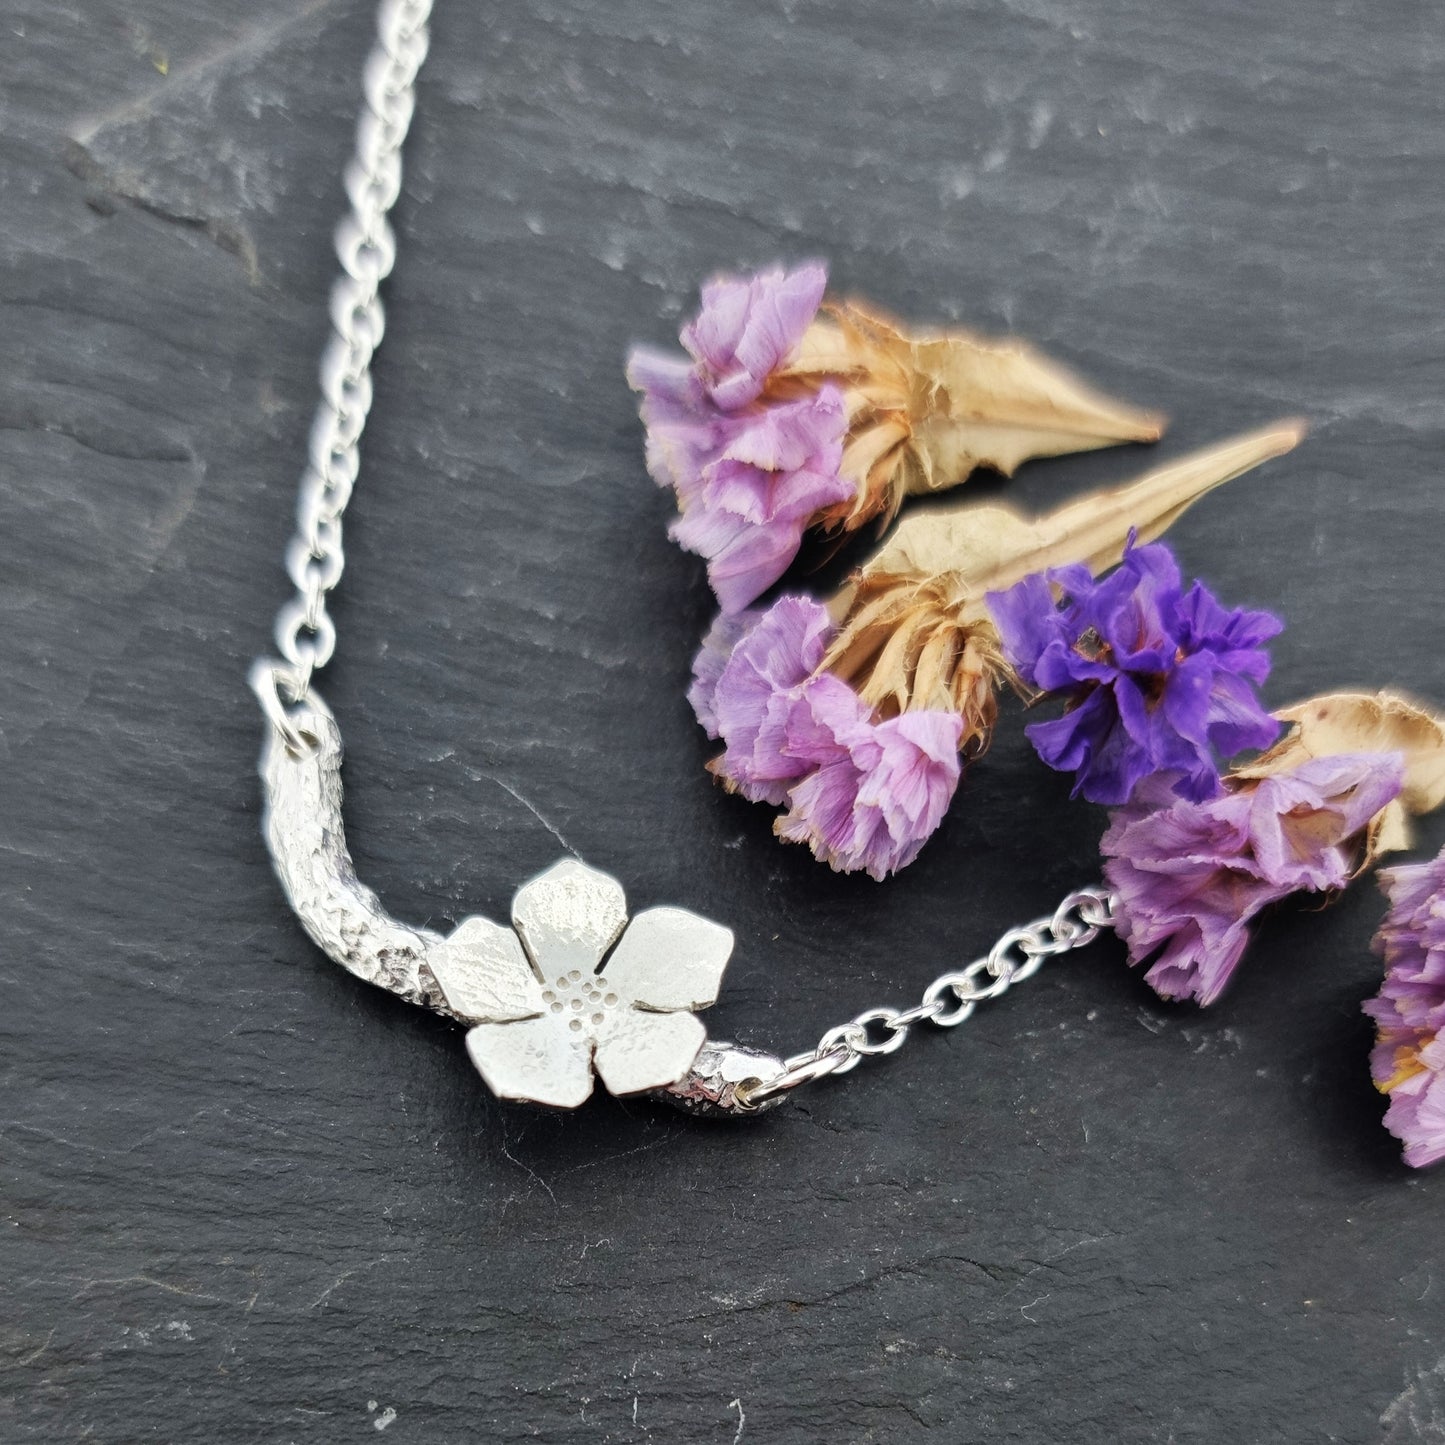 Silver necklace with small branch and a single 5 petal flower on it. Pictured with flowers. 